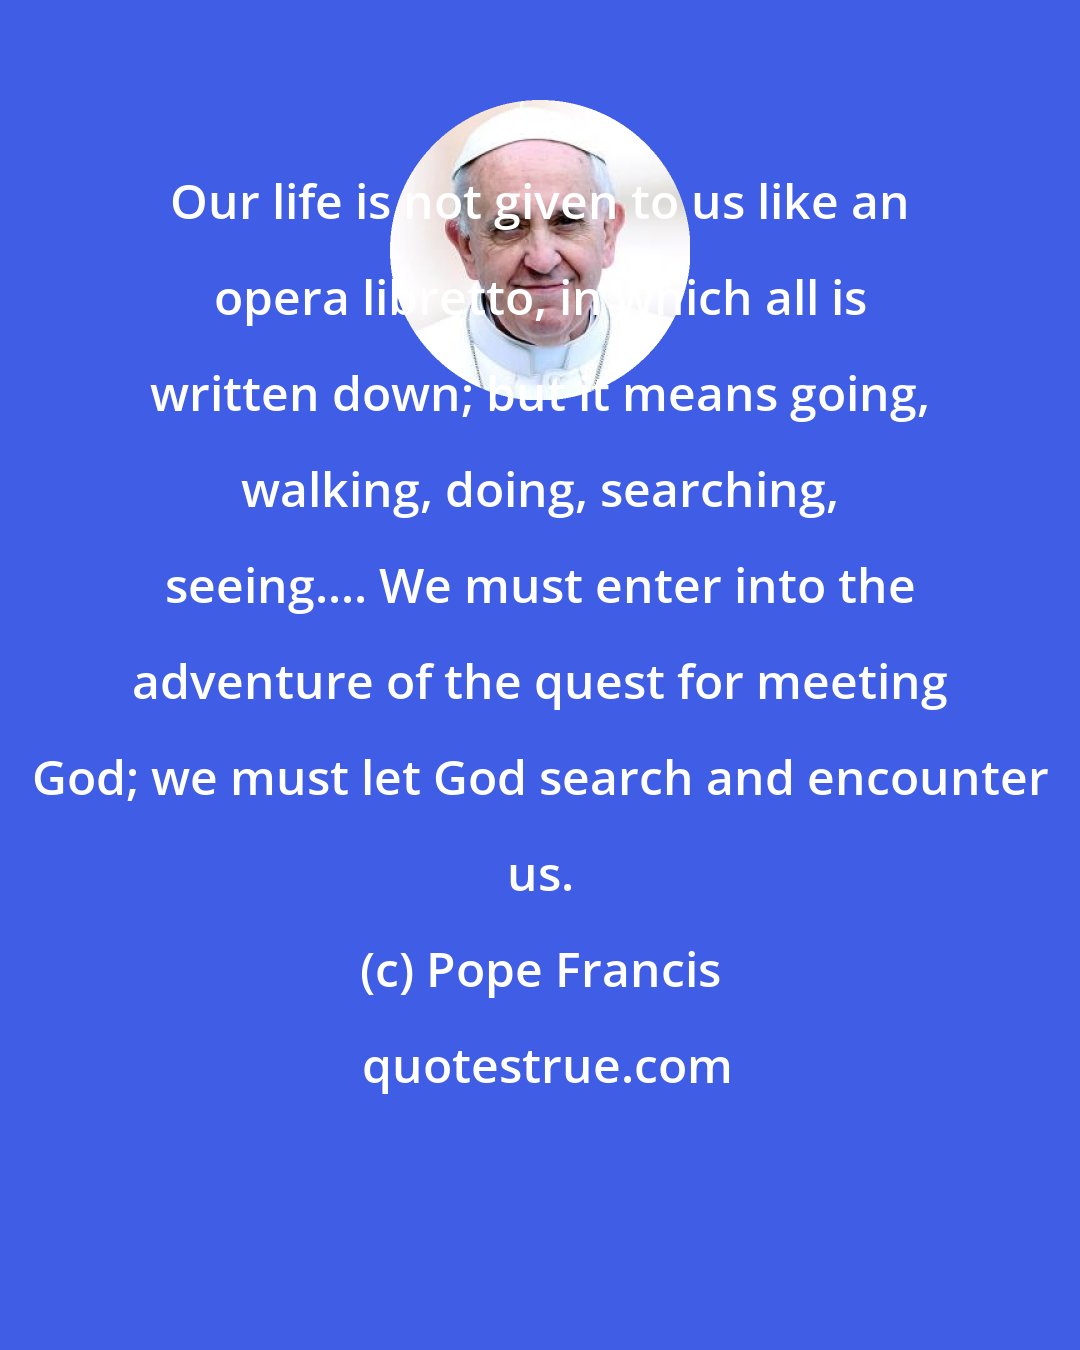 Pope Francis: Our life is not given to us like an opera libretto, in which all is written down; but it means going, walking, doing, searching, seeing.... We must enter into the adventure of the quest for meeting God; we must let God search and encounter us.